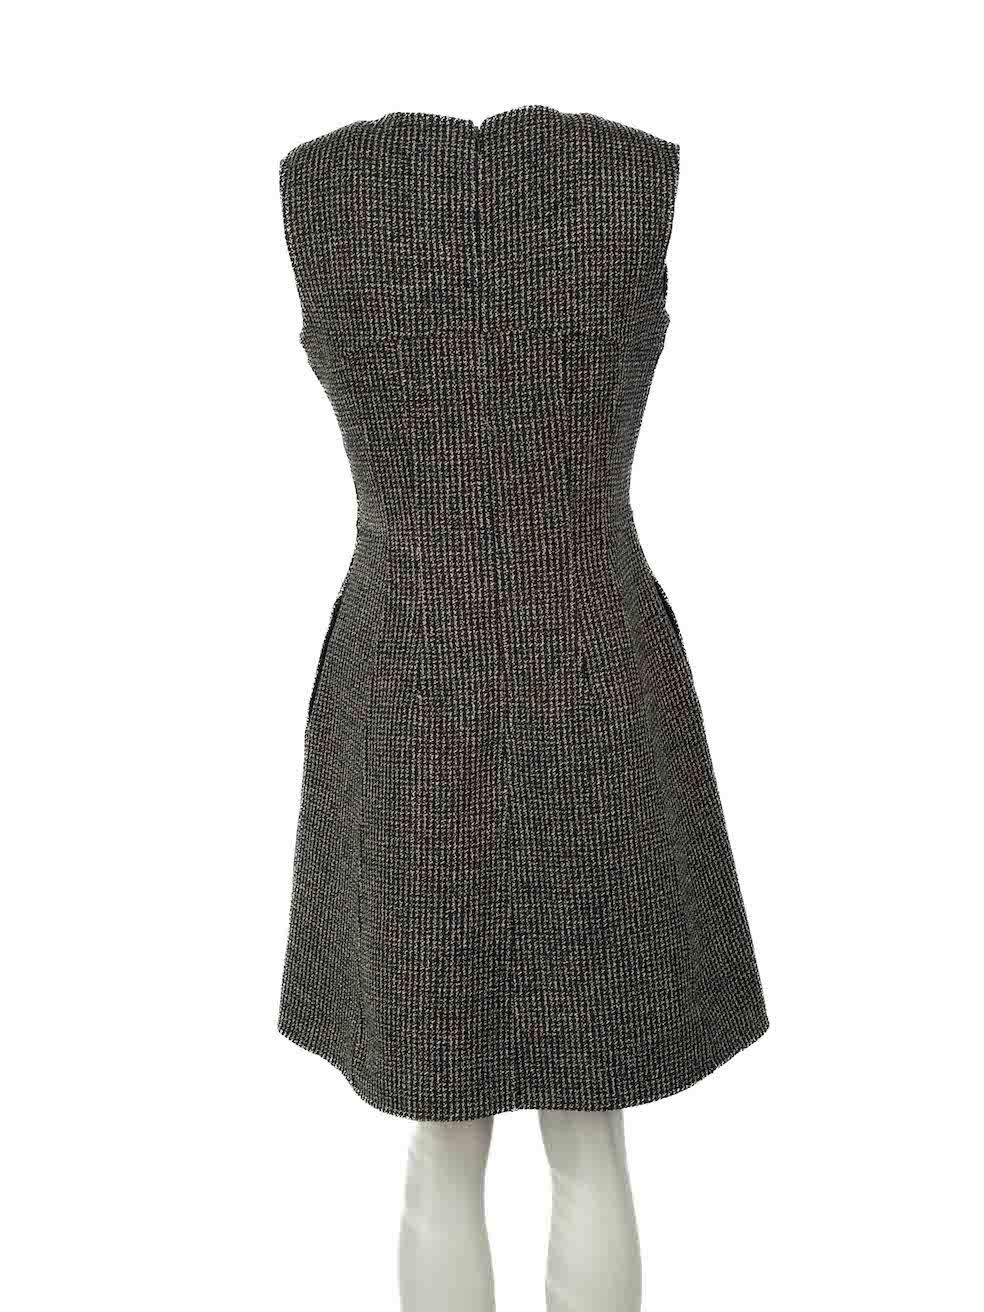 Dior Black Wool Round Neckline Mini Dress Size M In Excellent Condition For Sale In London, GB